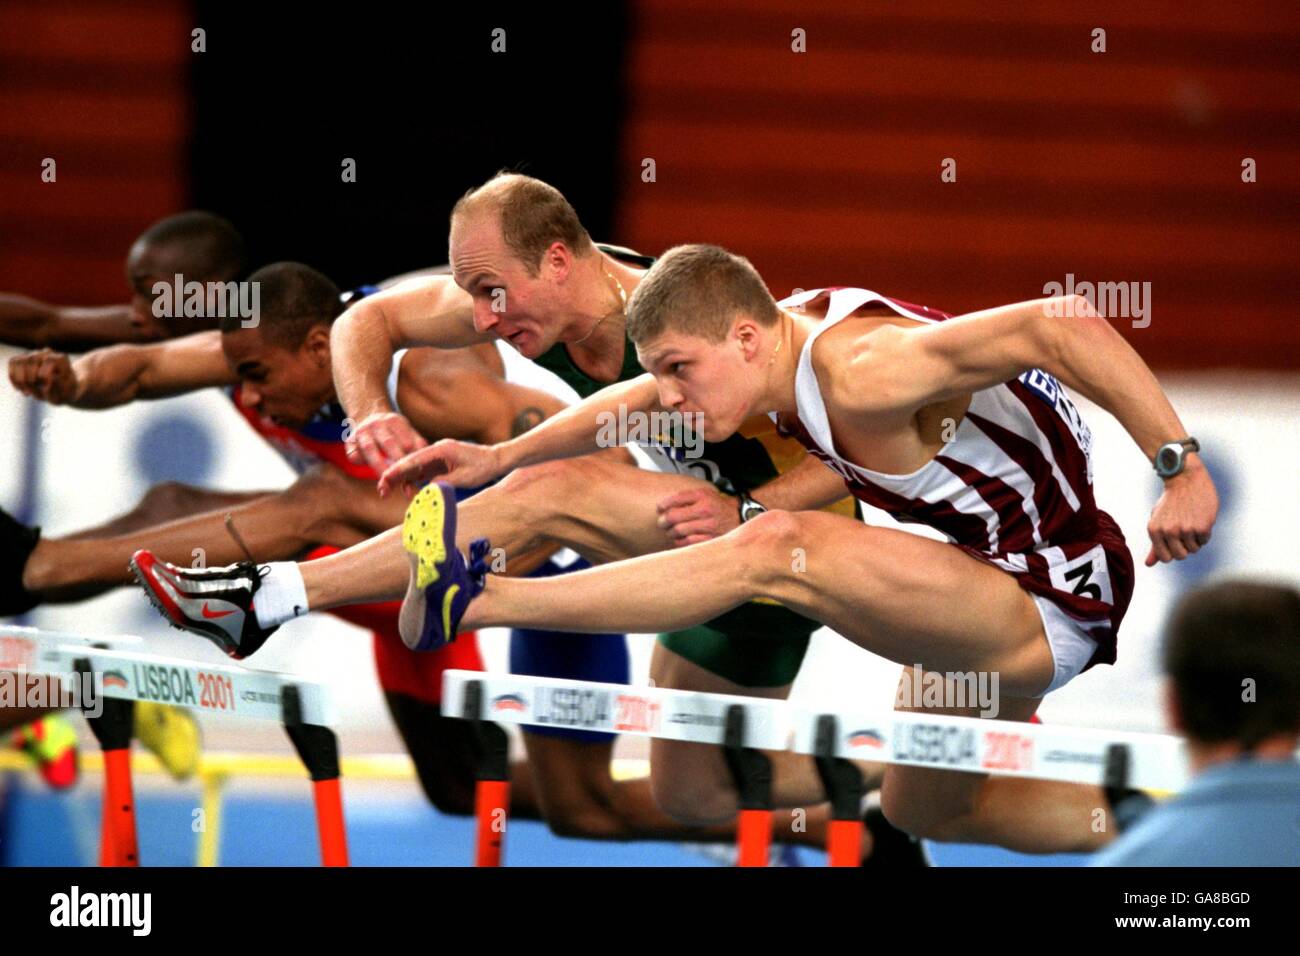 Athletics - IAAF World Indoor Championships 2001 - Lisbon. South Africa's Shaun Bownes (l) and Stanislavs Olijars (r) in action during the Men's 60m Hurdles Stock Photo